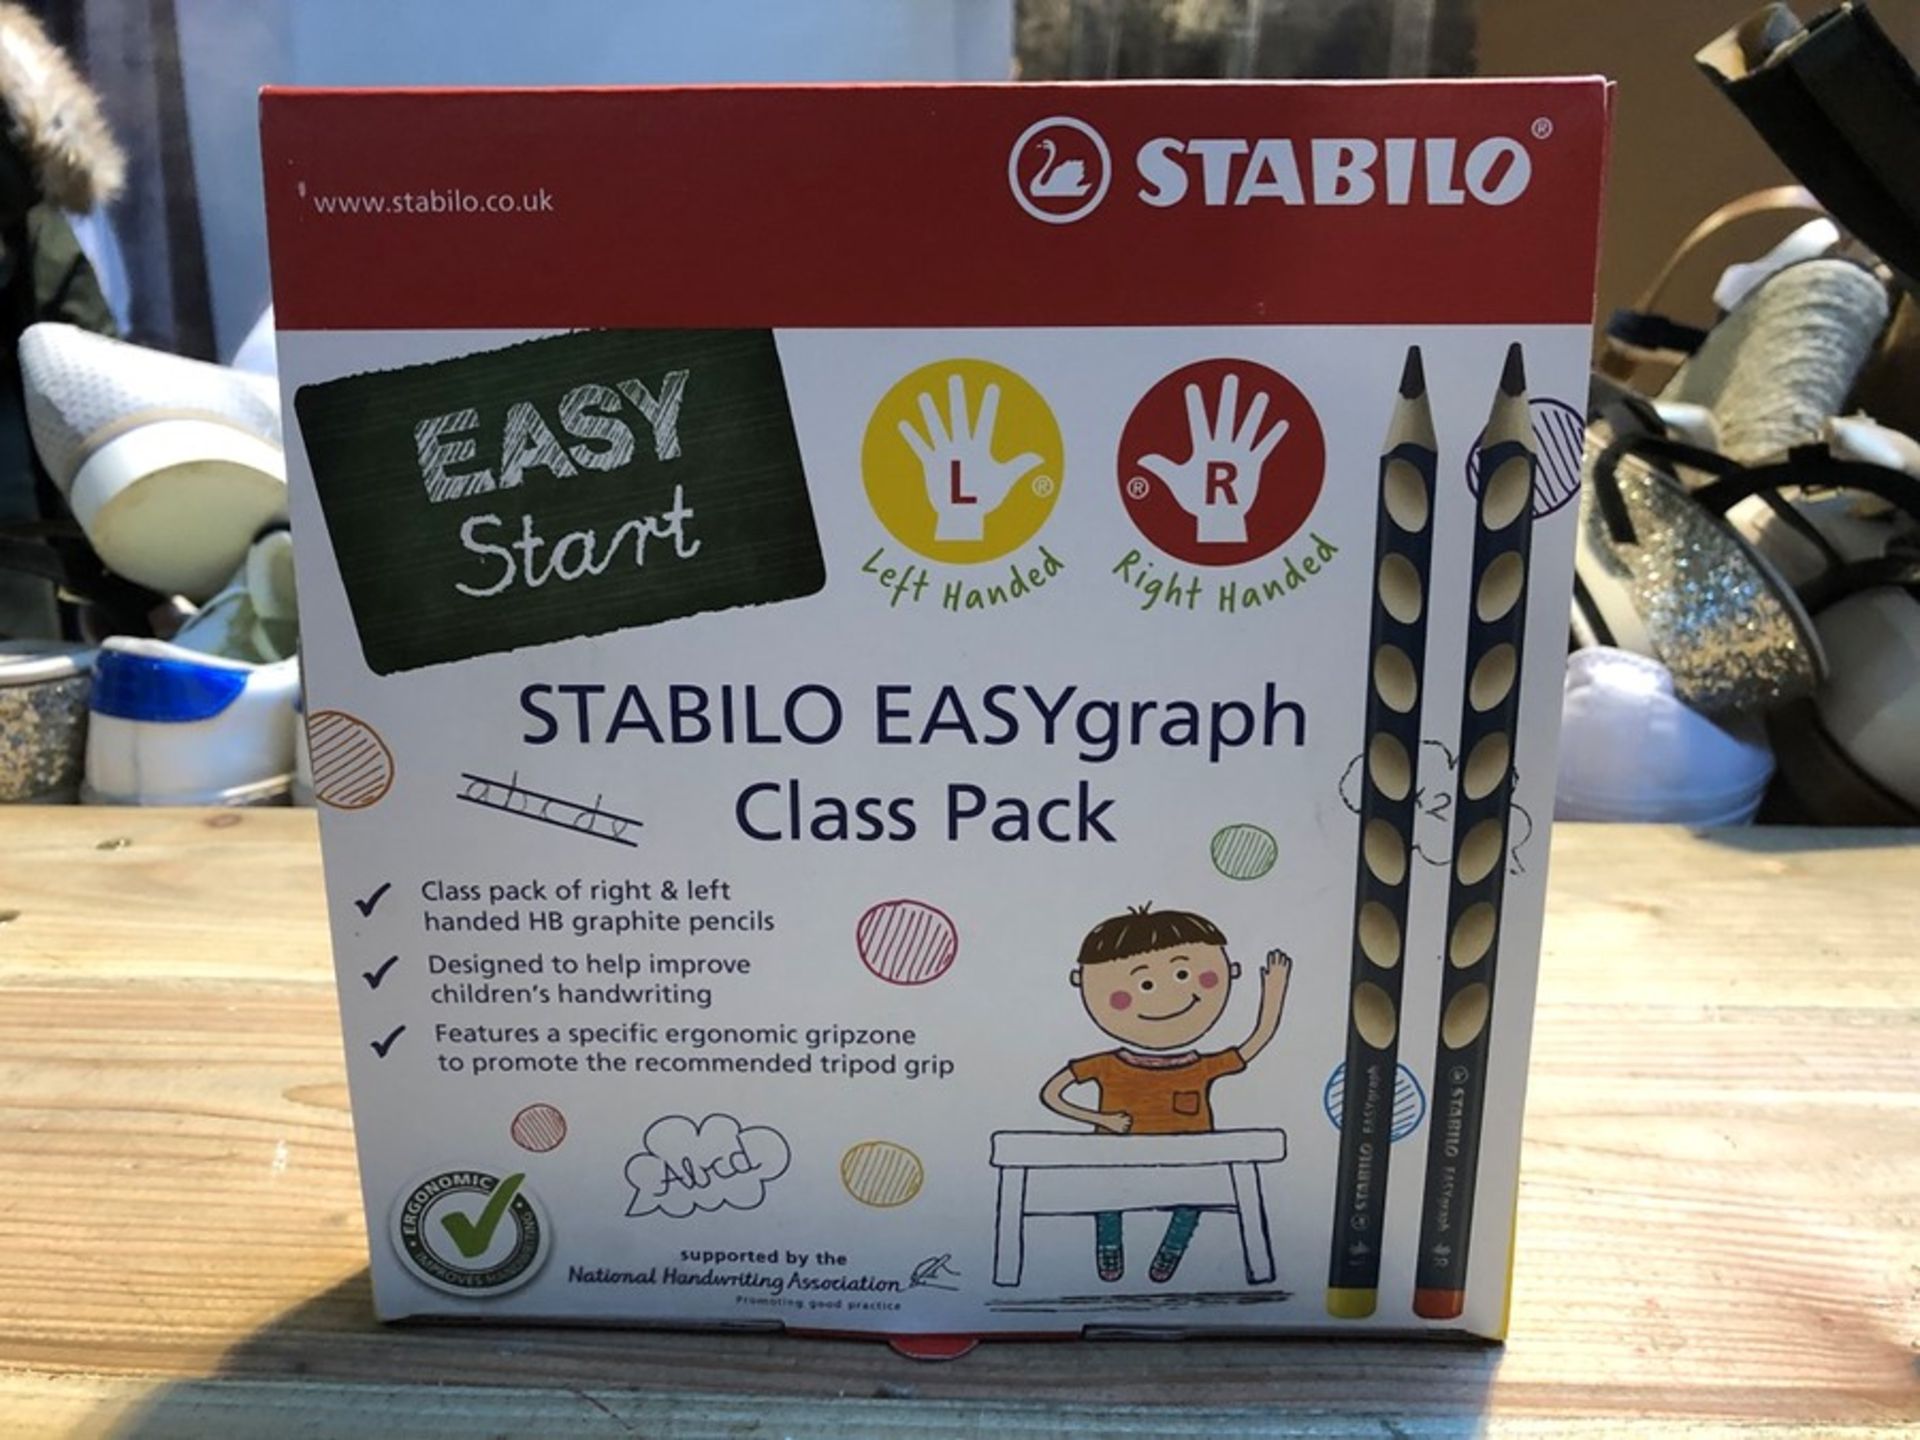 1 BOXED SET OF STABILO EASYGRAPH CLASS PACK OF PECILS - 48PCS PER BOX / RRP £49.85 (PUBLIC VIEWING